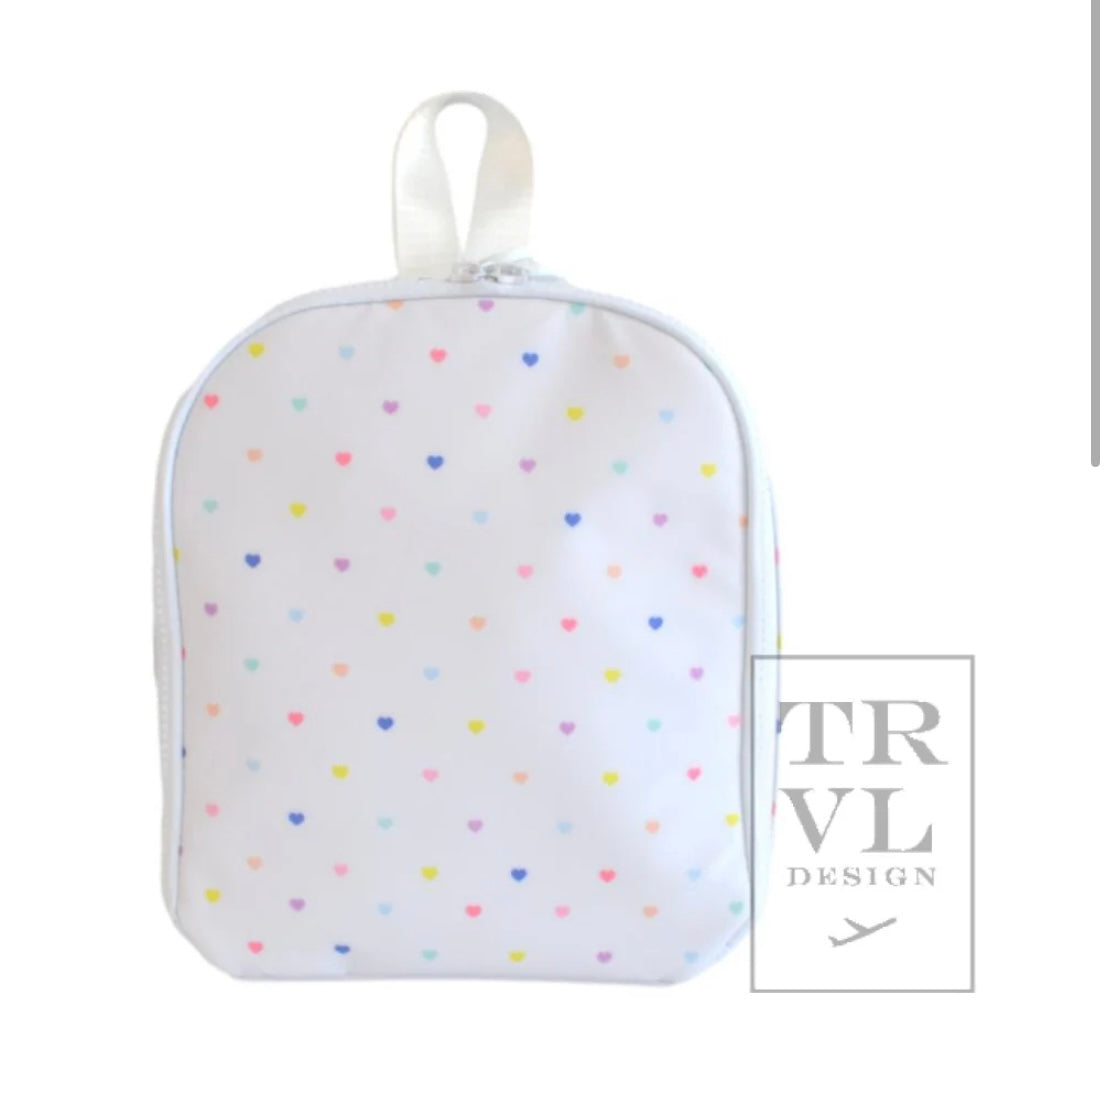 Bring It Lunch Tote - Love Hearts